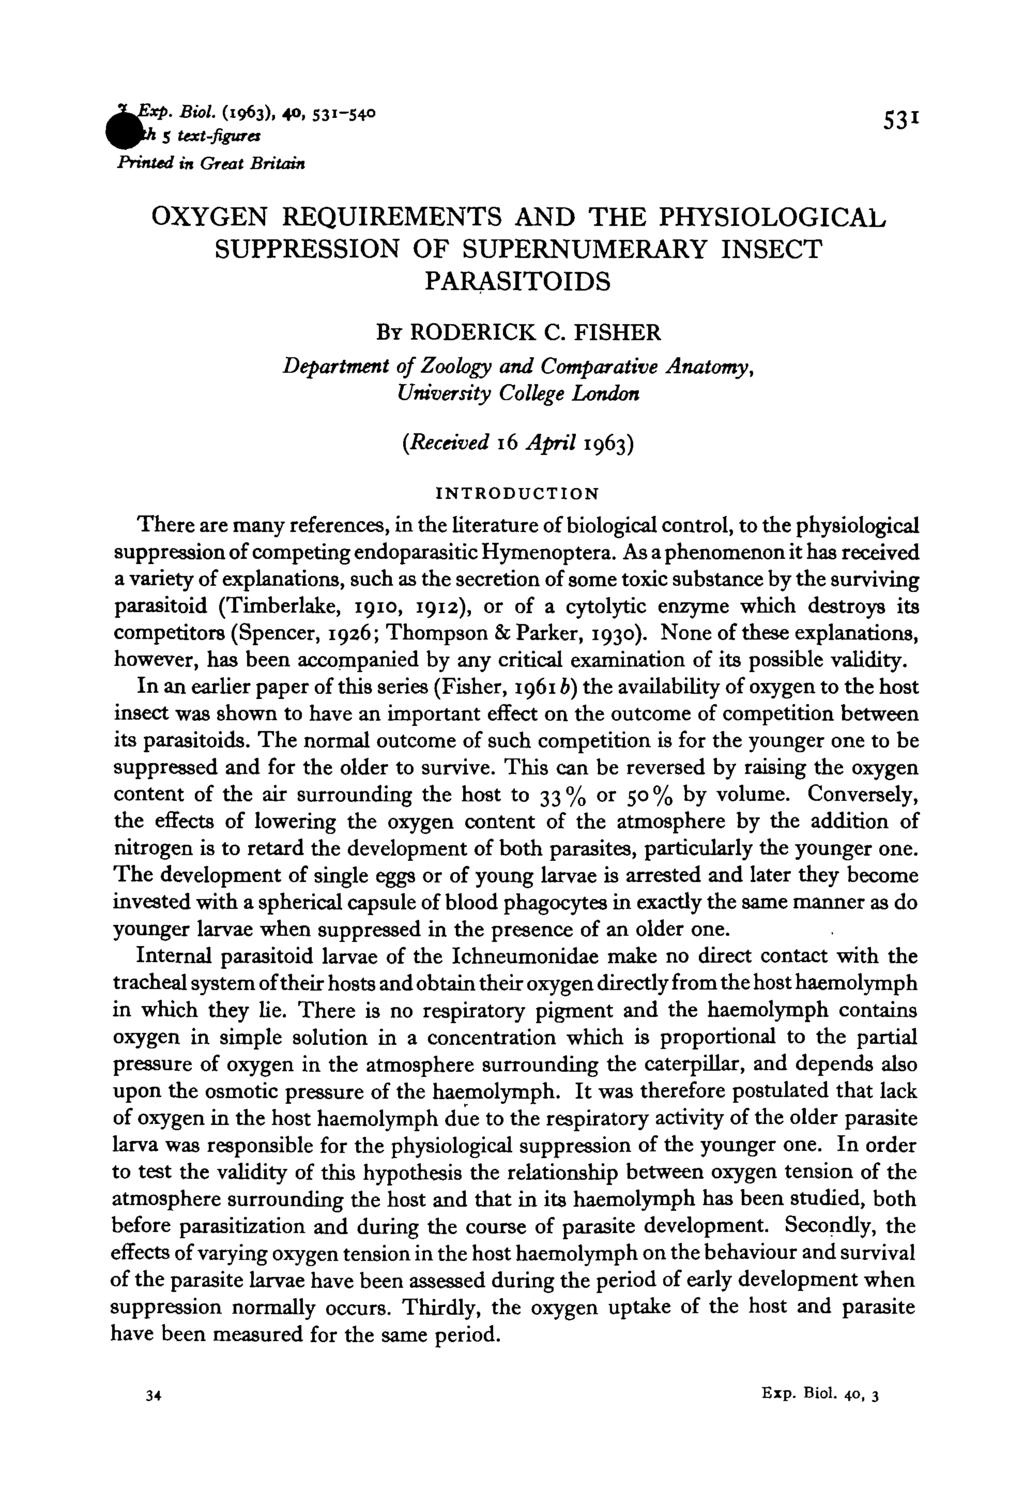 p. Biol. (96), 0, 550 textfigures Printed in Gret Britin OXYGEN REQUIREMENTS AND THE PHYSIOLOGICAL SUPPRESSION OF SUPERNUMERARY INSECT PARASITOIDS BY RODERICK C.